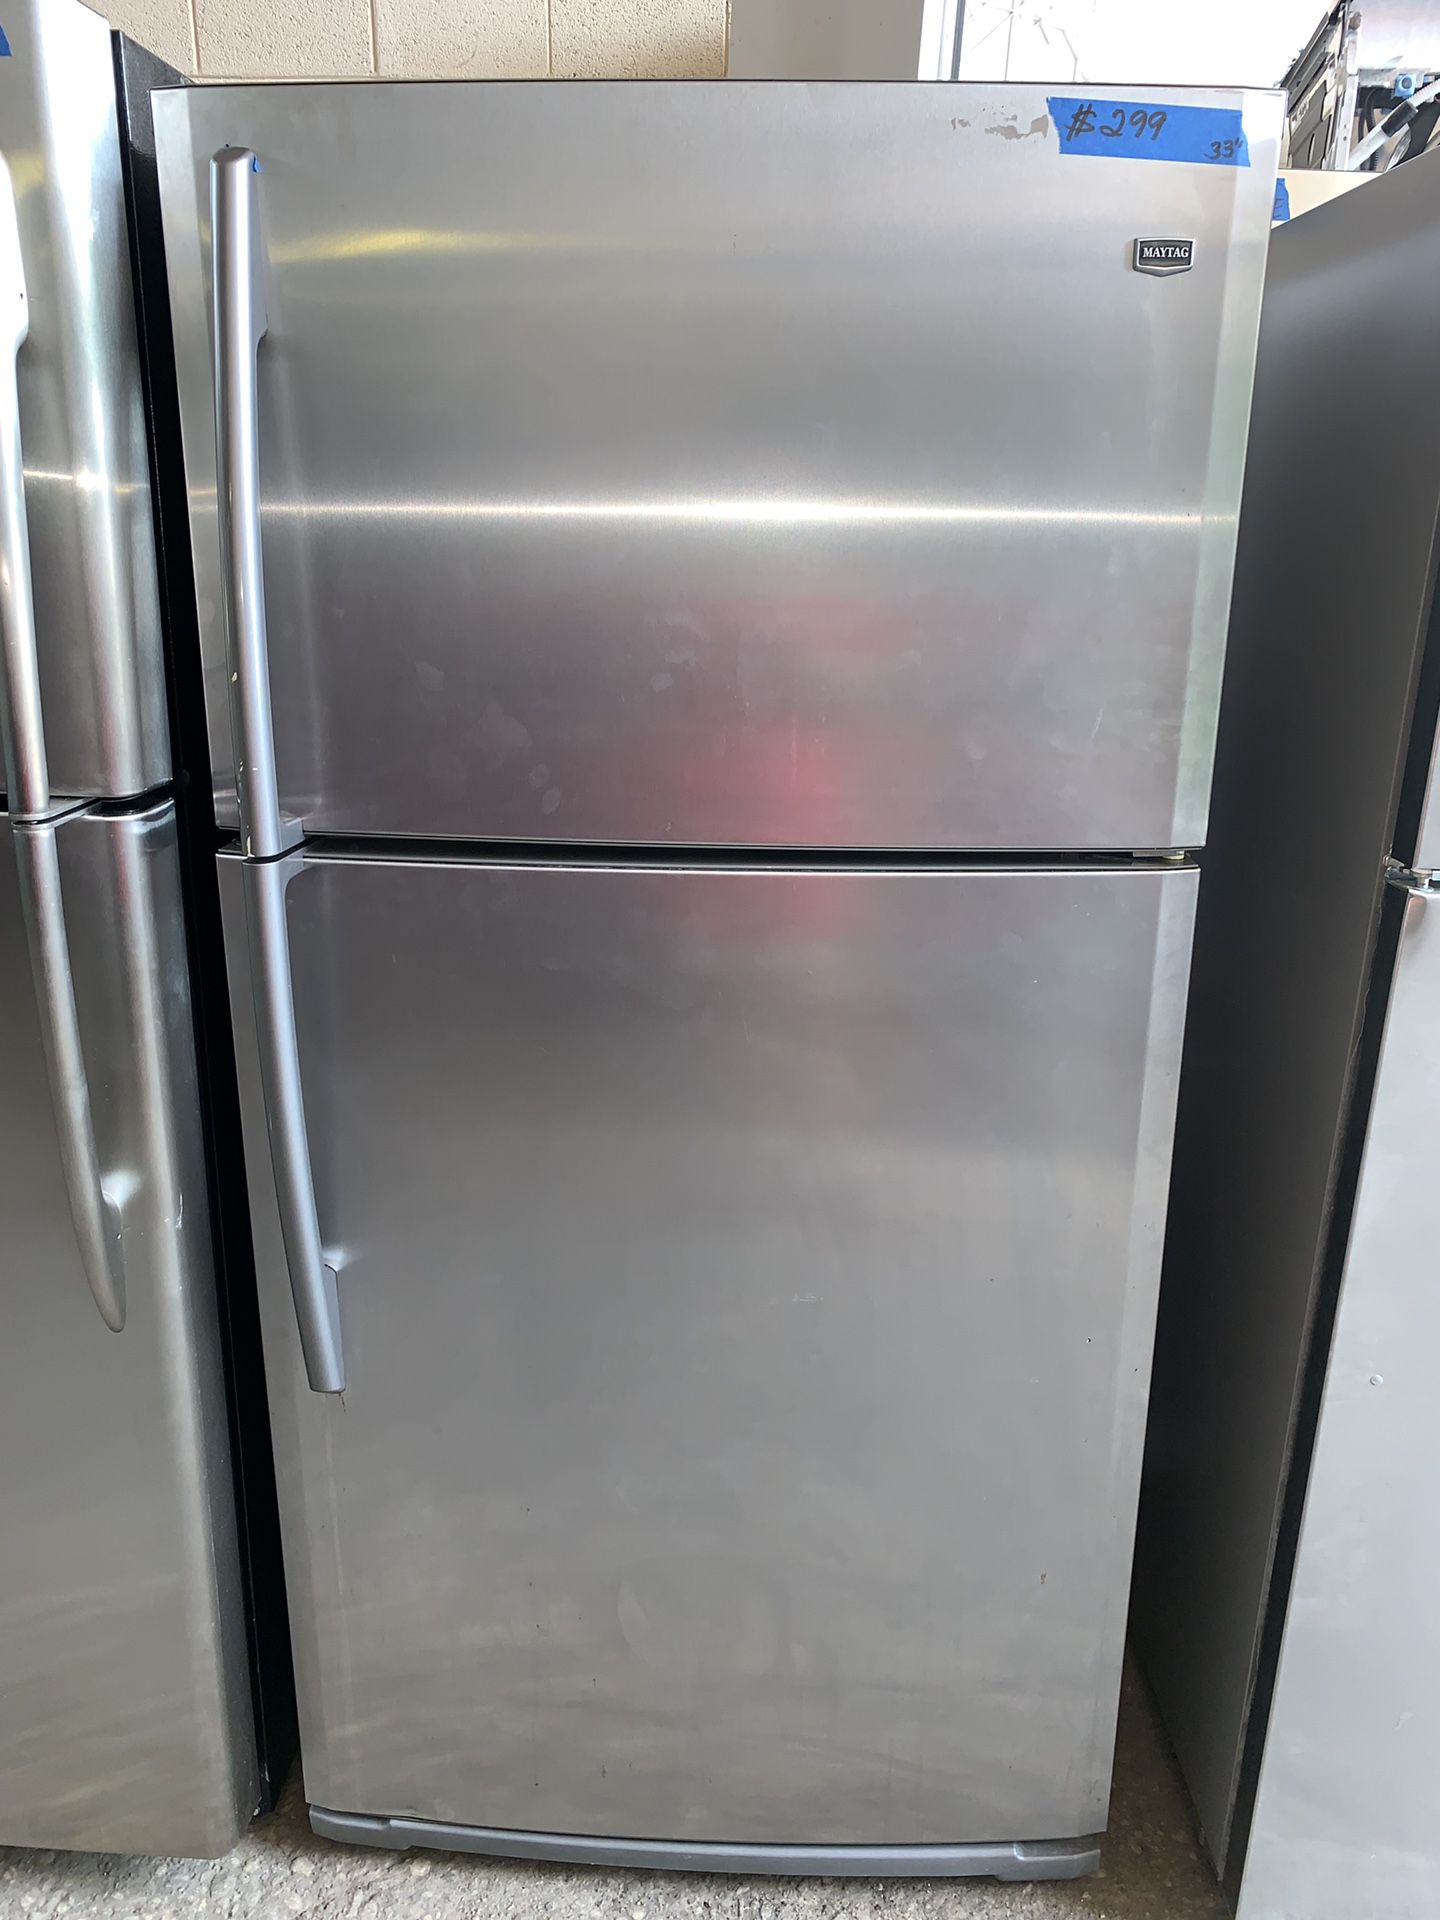 Maytag 33in. Stainless steel top and bottom refrigerator working perfectly with 4 months warranty